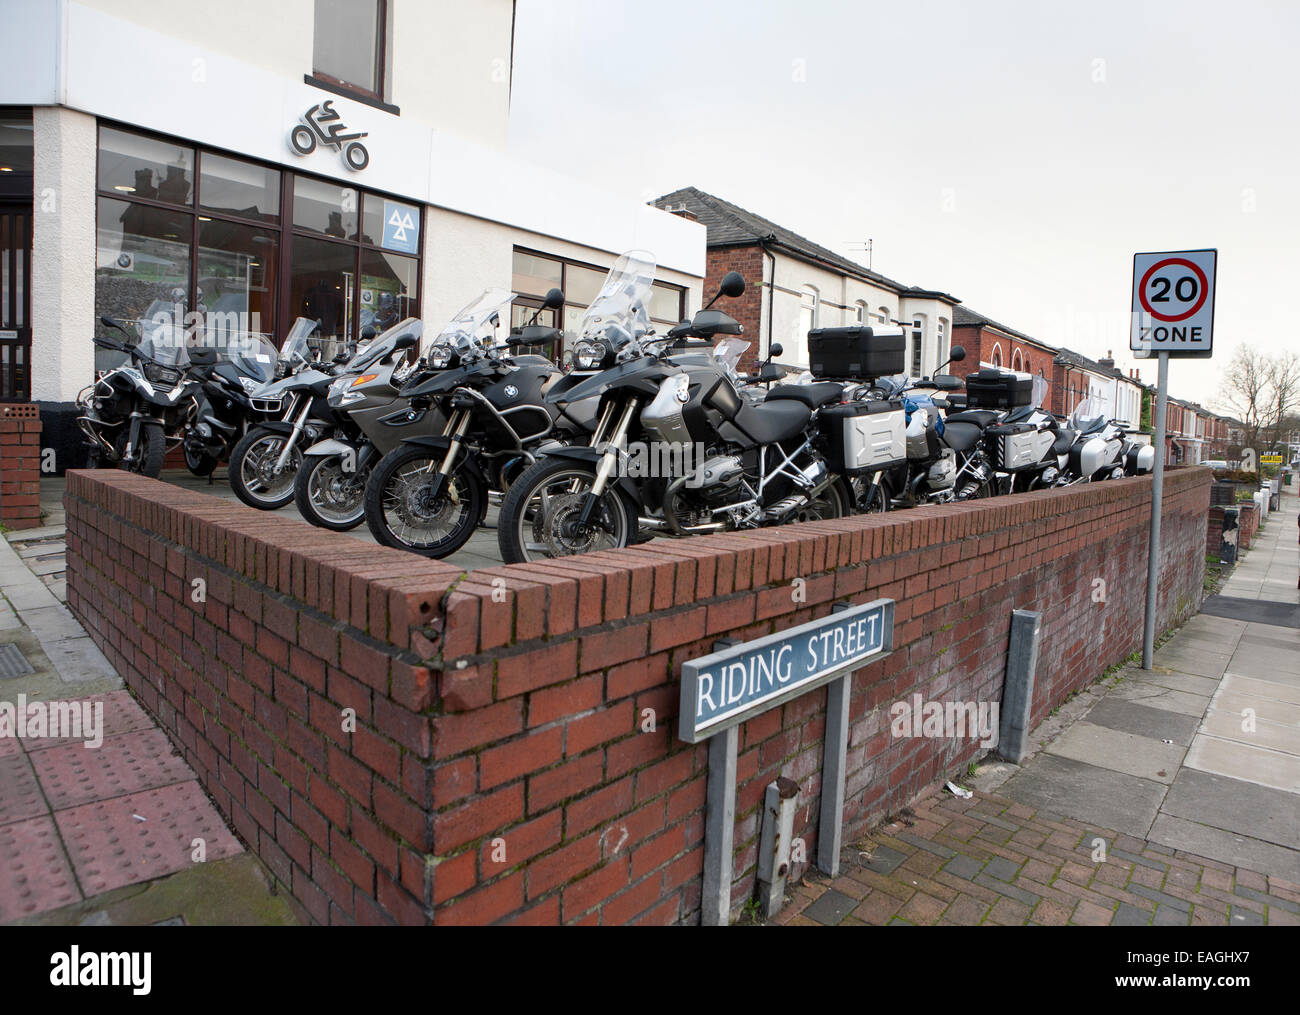 Motorbike dealership ironically located on Riding Street with a 20mph speed limit sign in background, Southport, Merseyside, UK Stock Photo